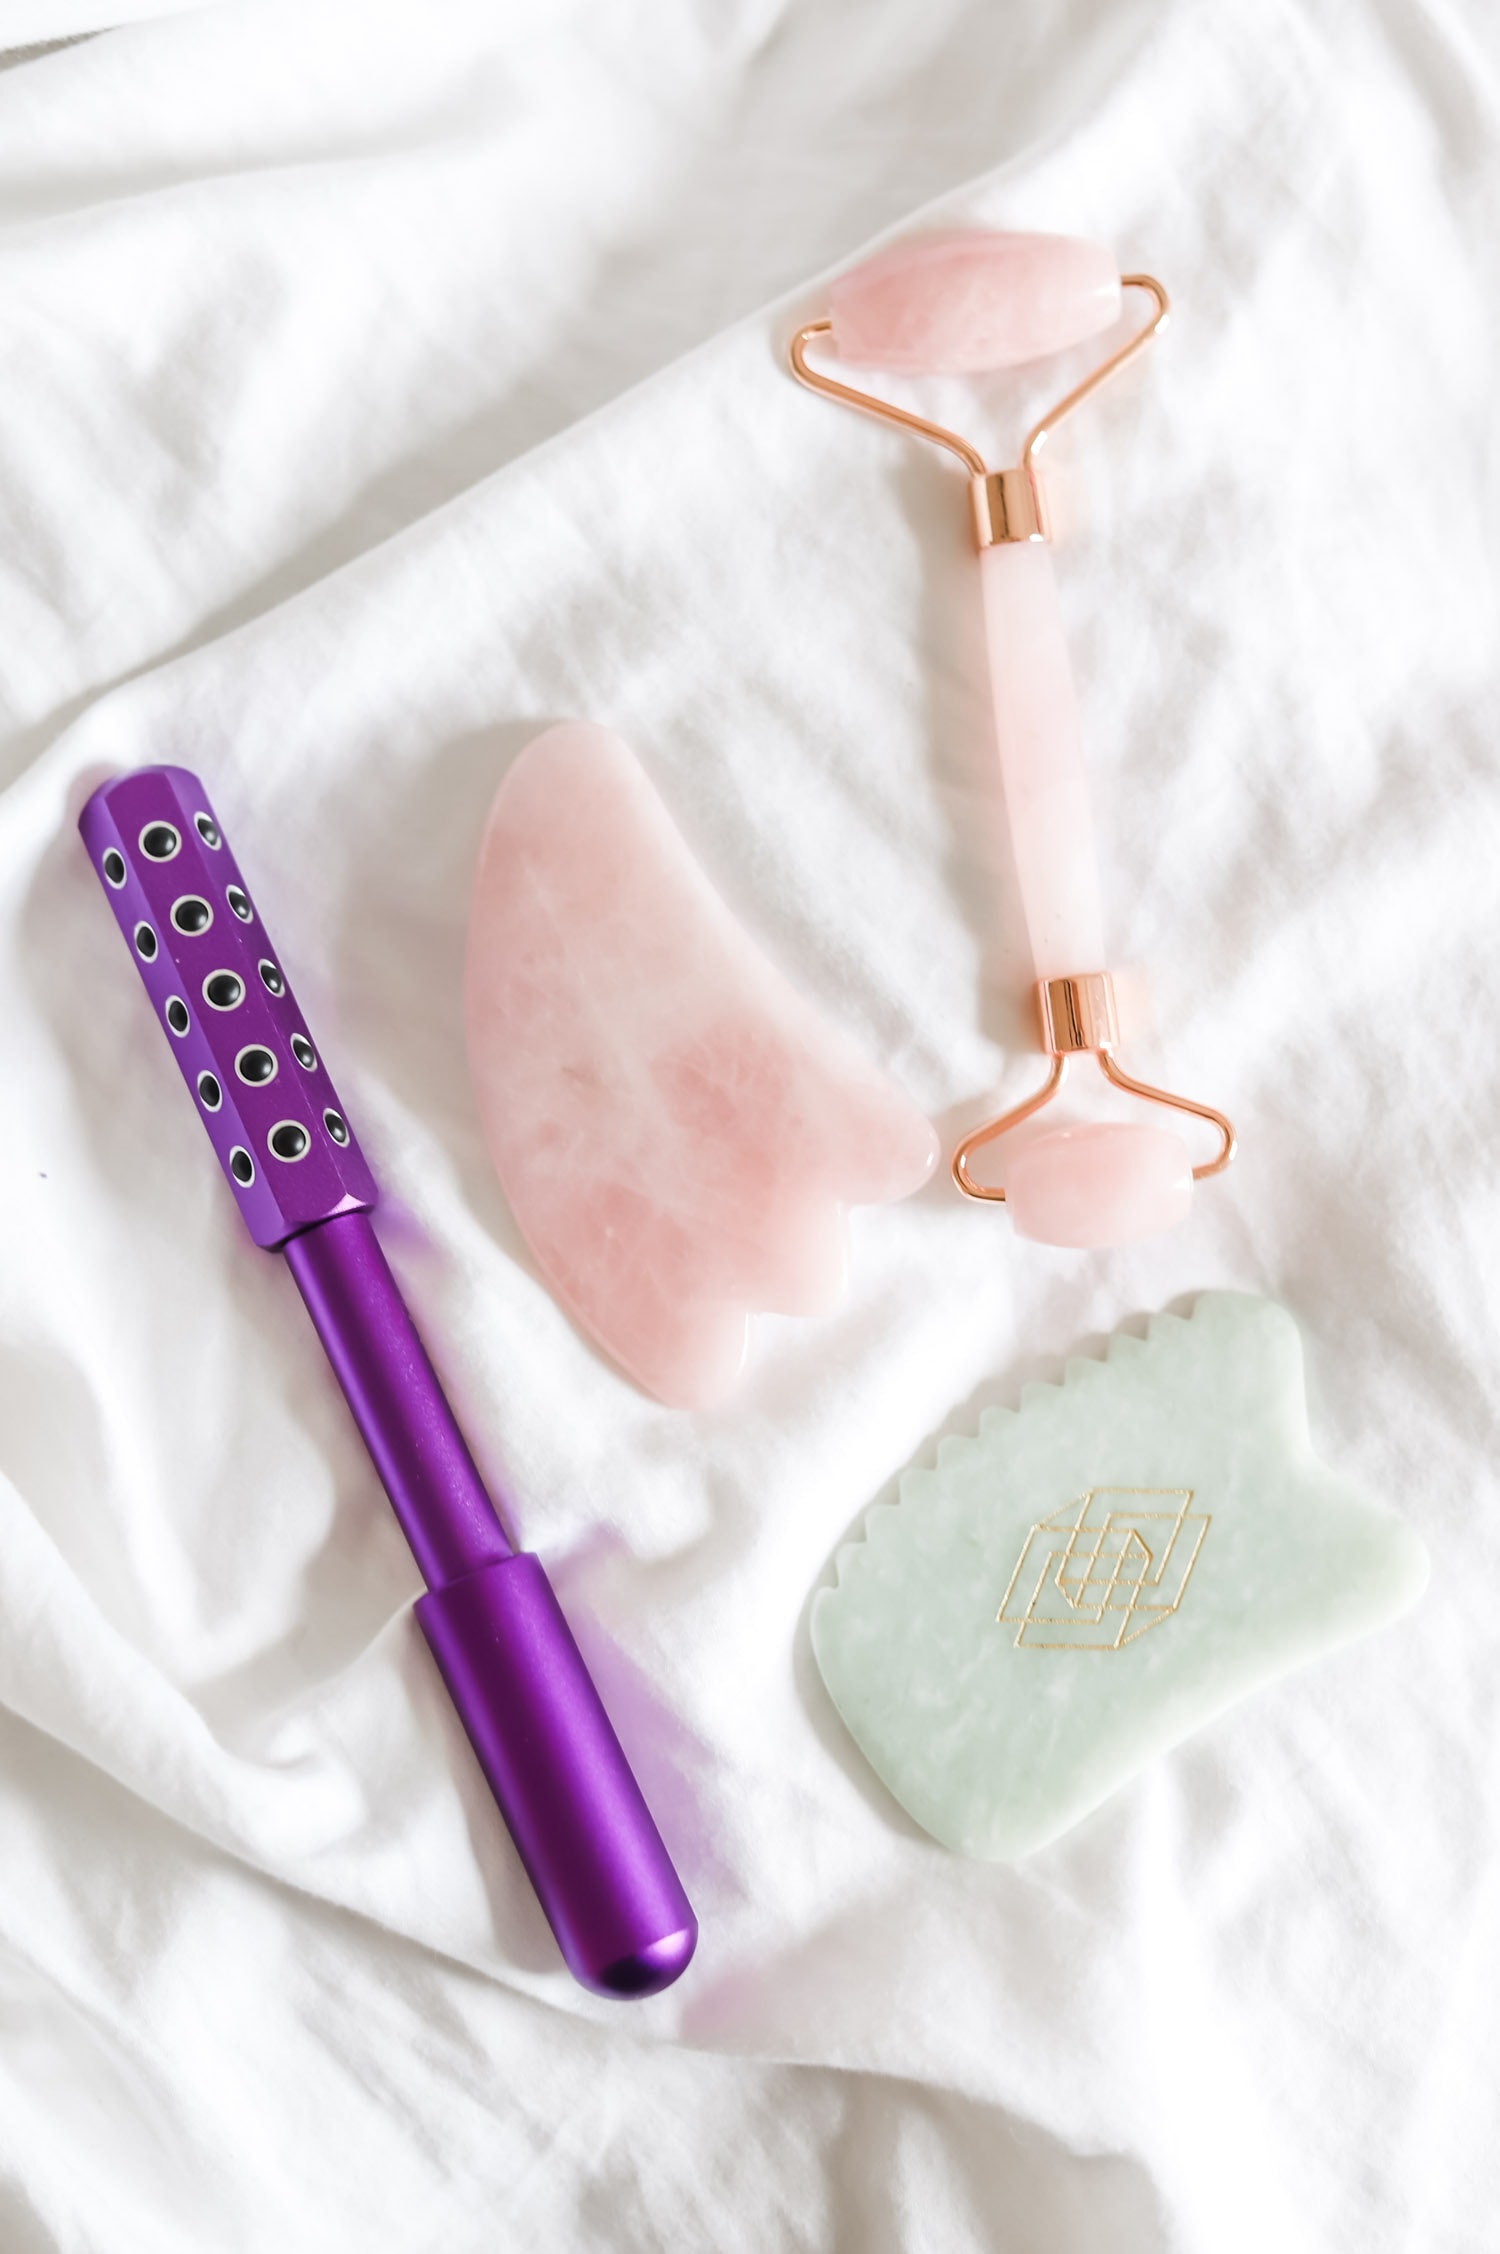 What to Buy On Amazon: the top beauty and fashion bestsellers from Amazon Prime - including the best skincare tools under $20! I'm sharing my favorite rose quartz and gua sha gift set under $20, a Nurse Jamie face roller dupe for under $20, and an affordable jade gua sha tool with a comb for under $15! | Orlando, Florida beauty and fashion blogger Ashley Brooke Nicholas